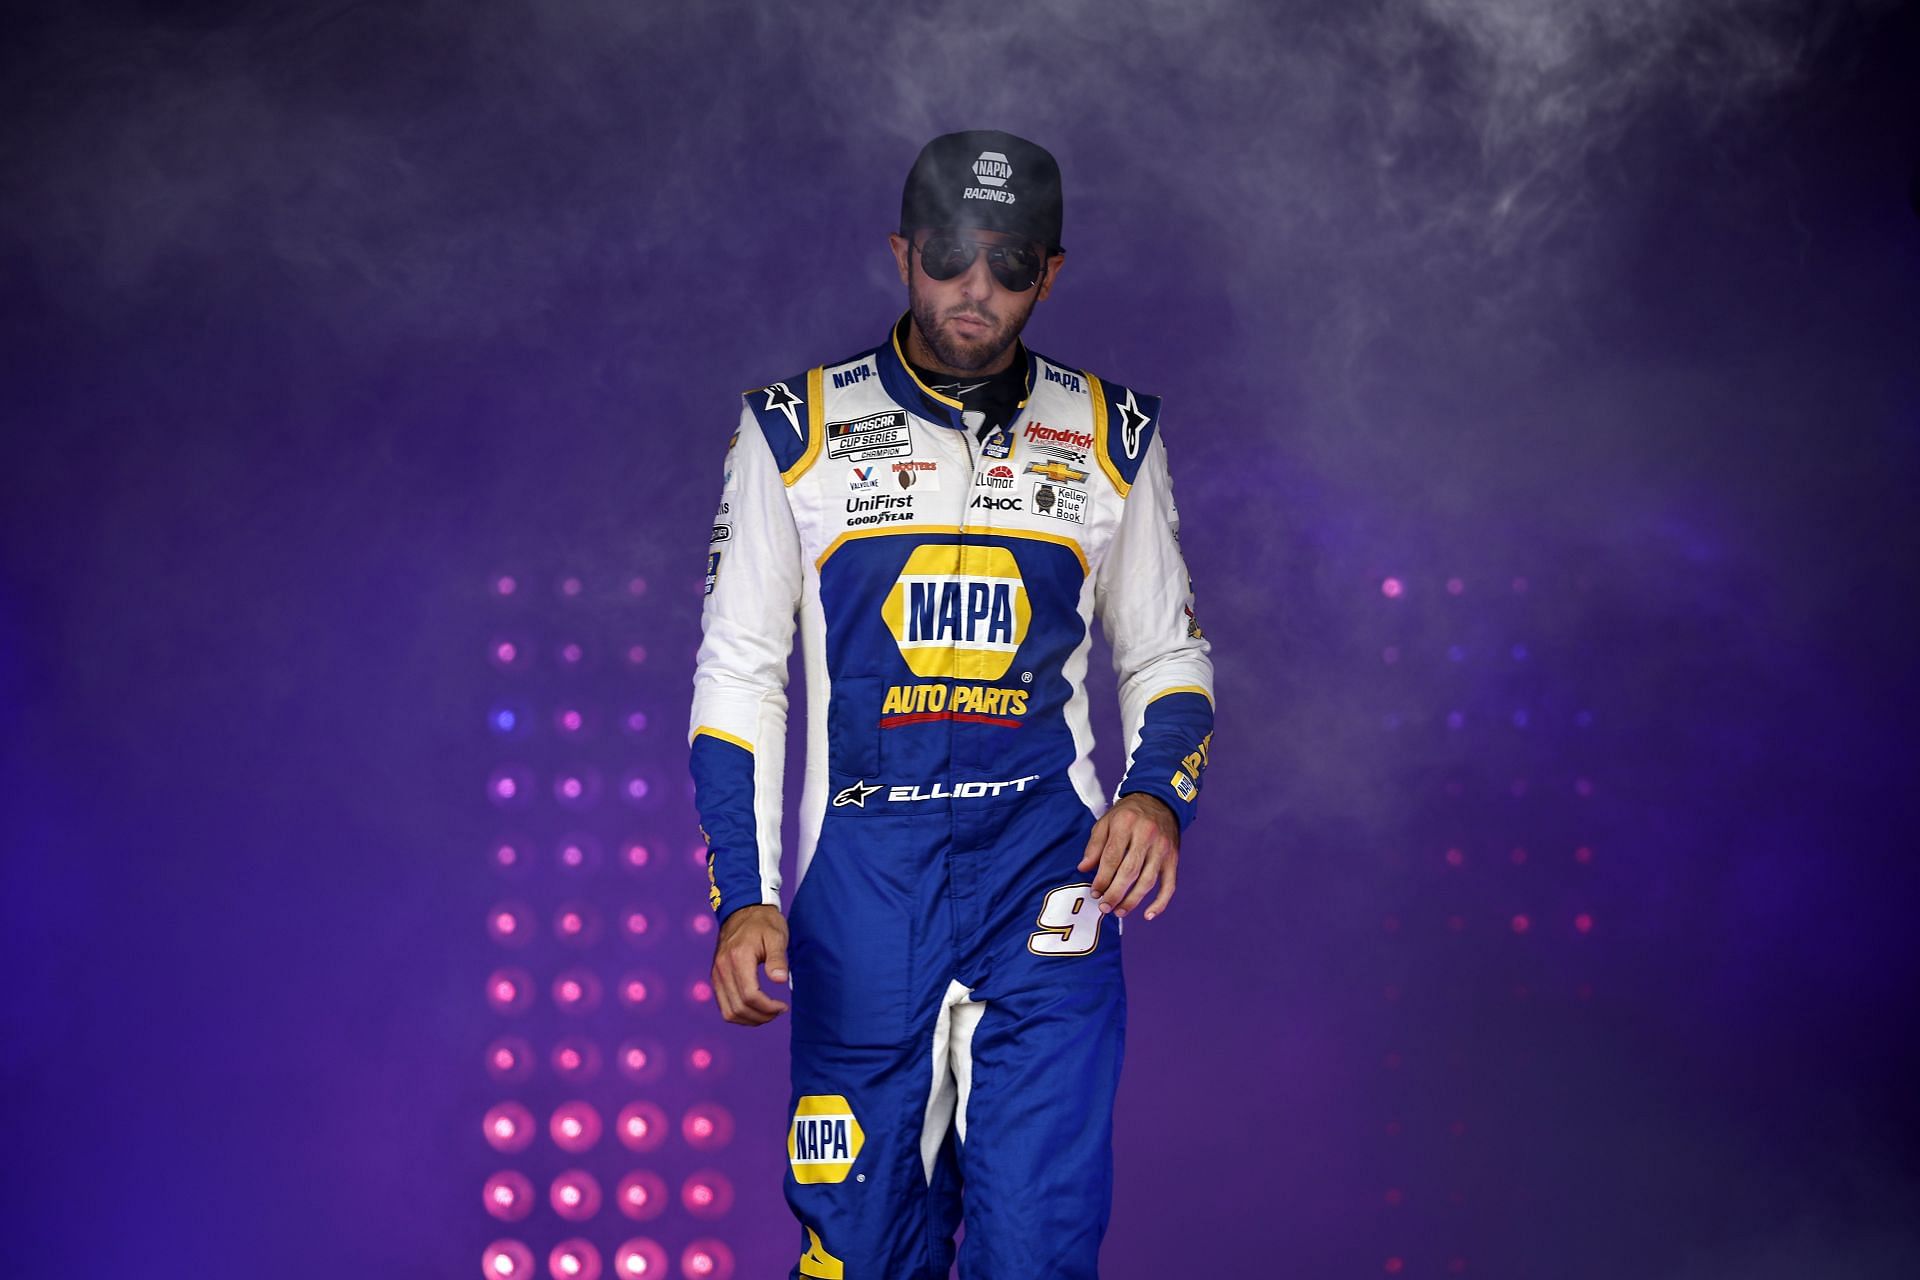 Chase Elliott walks onstage during driver intros before the NASCAR Cup Series Federated Auto Parts 400 at Richmond Raceway